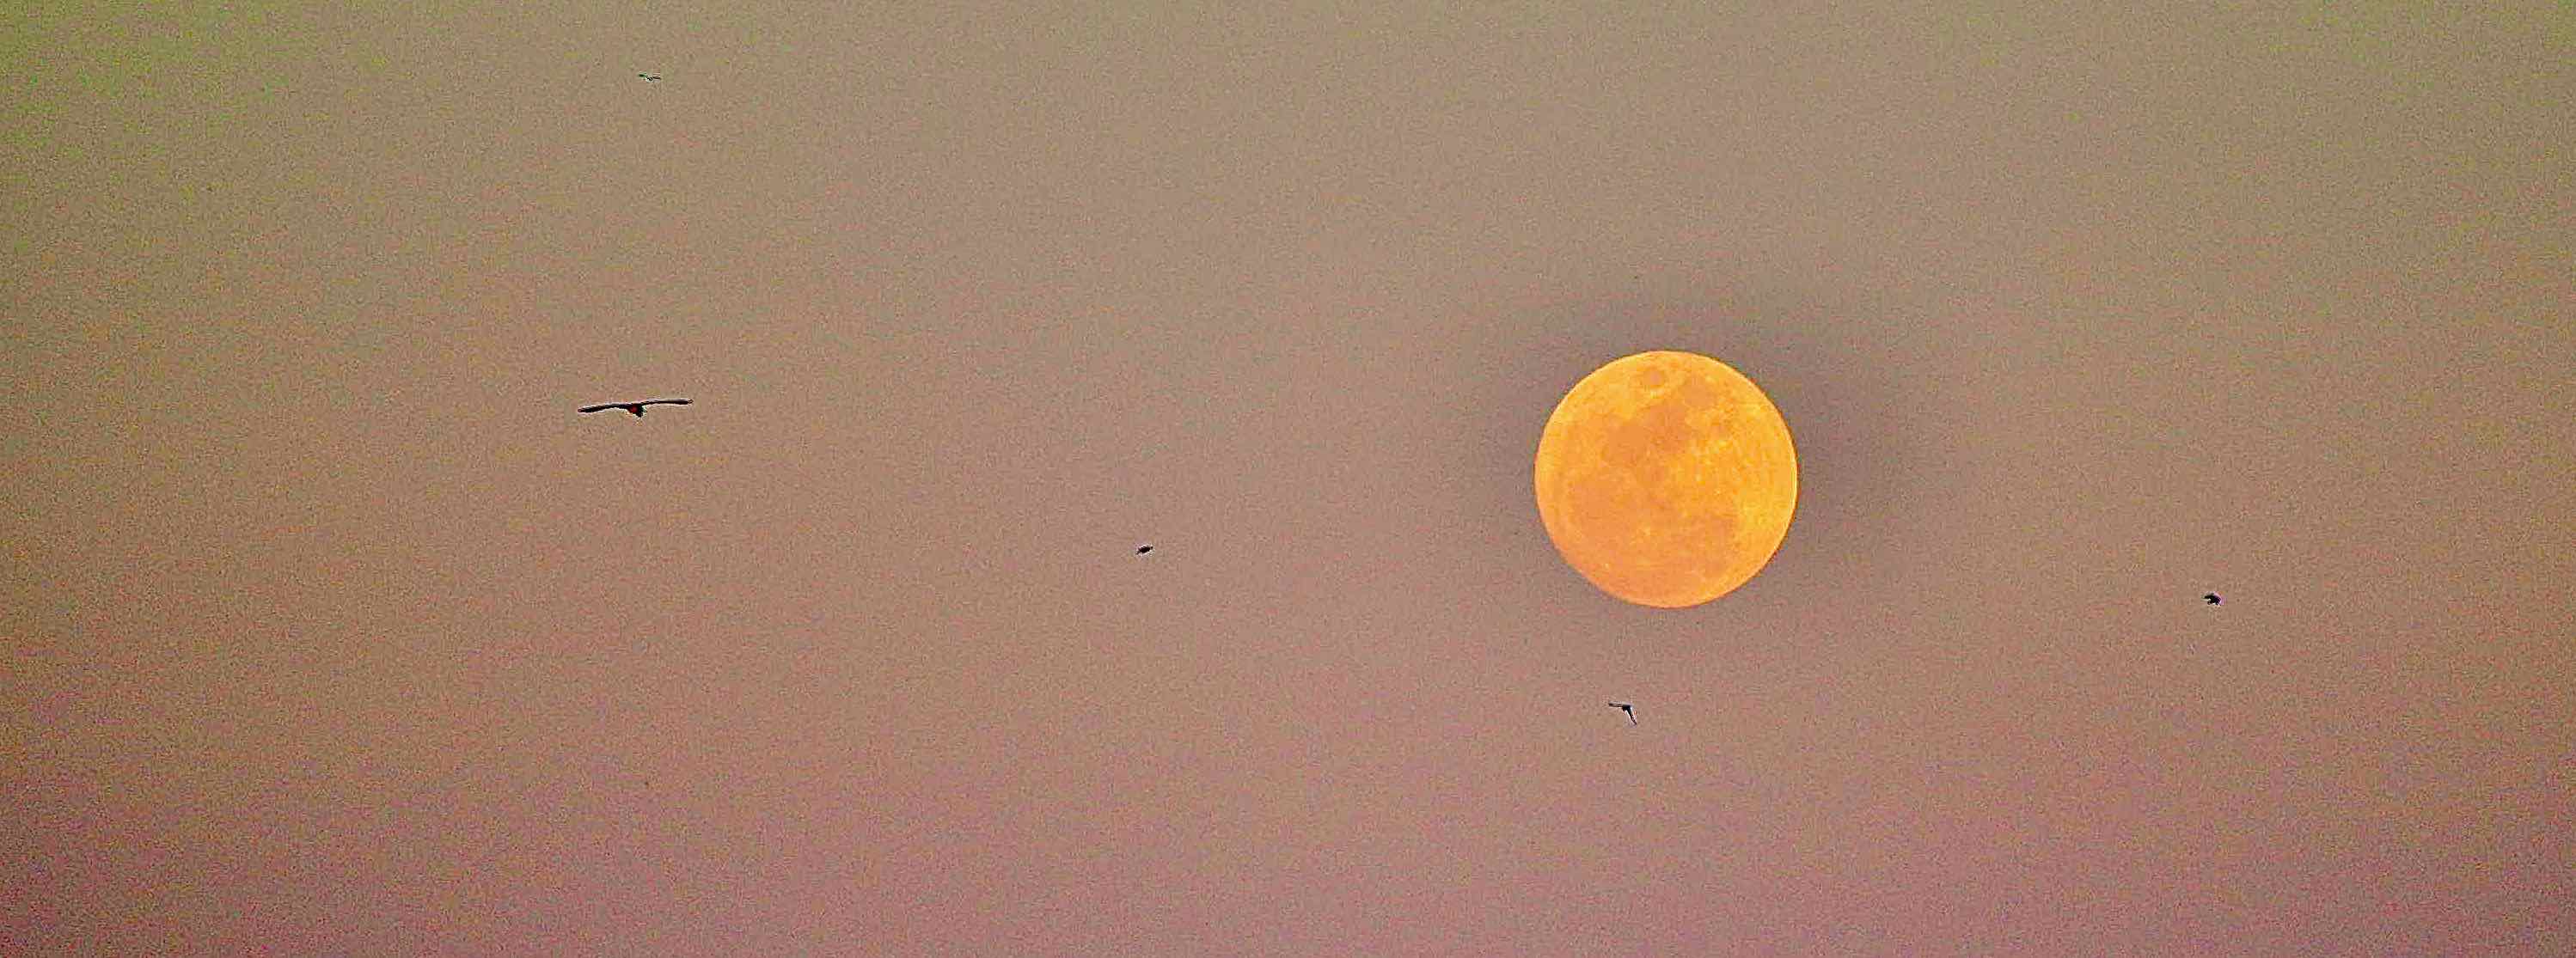 moon and birds